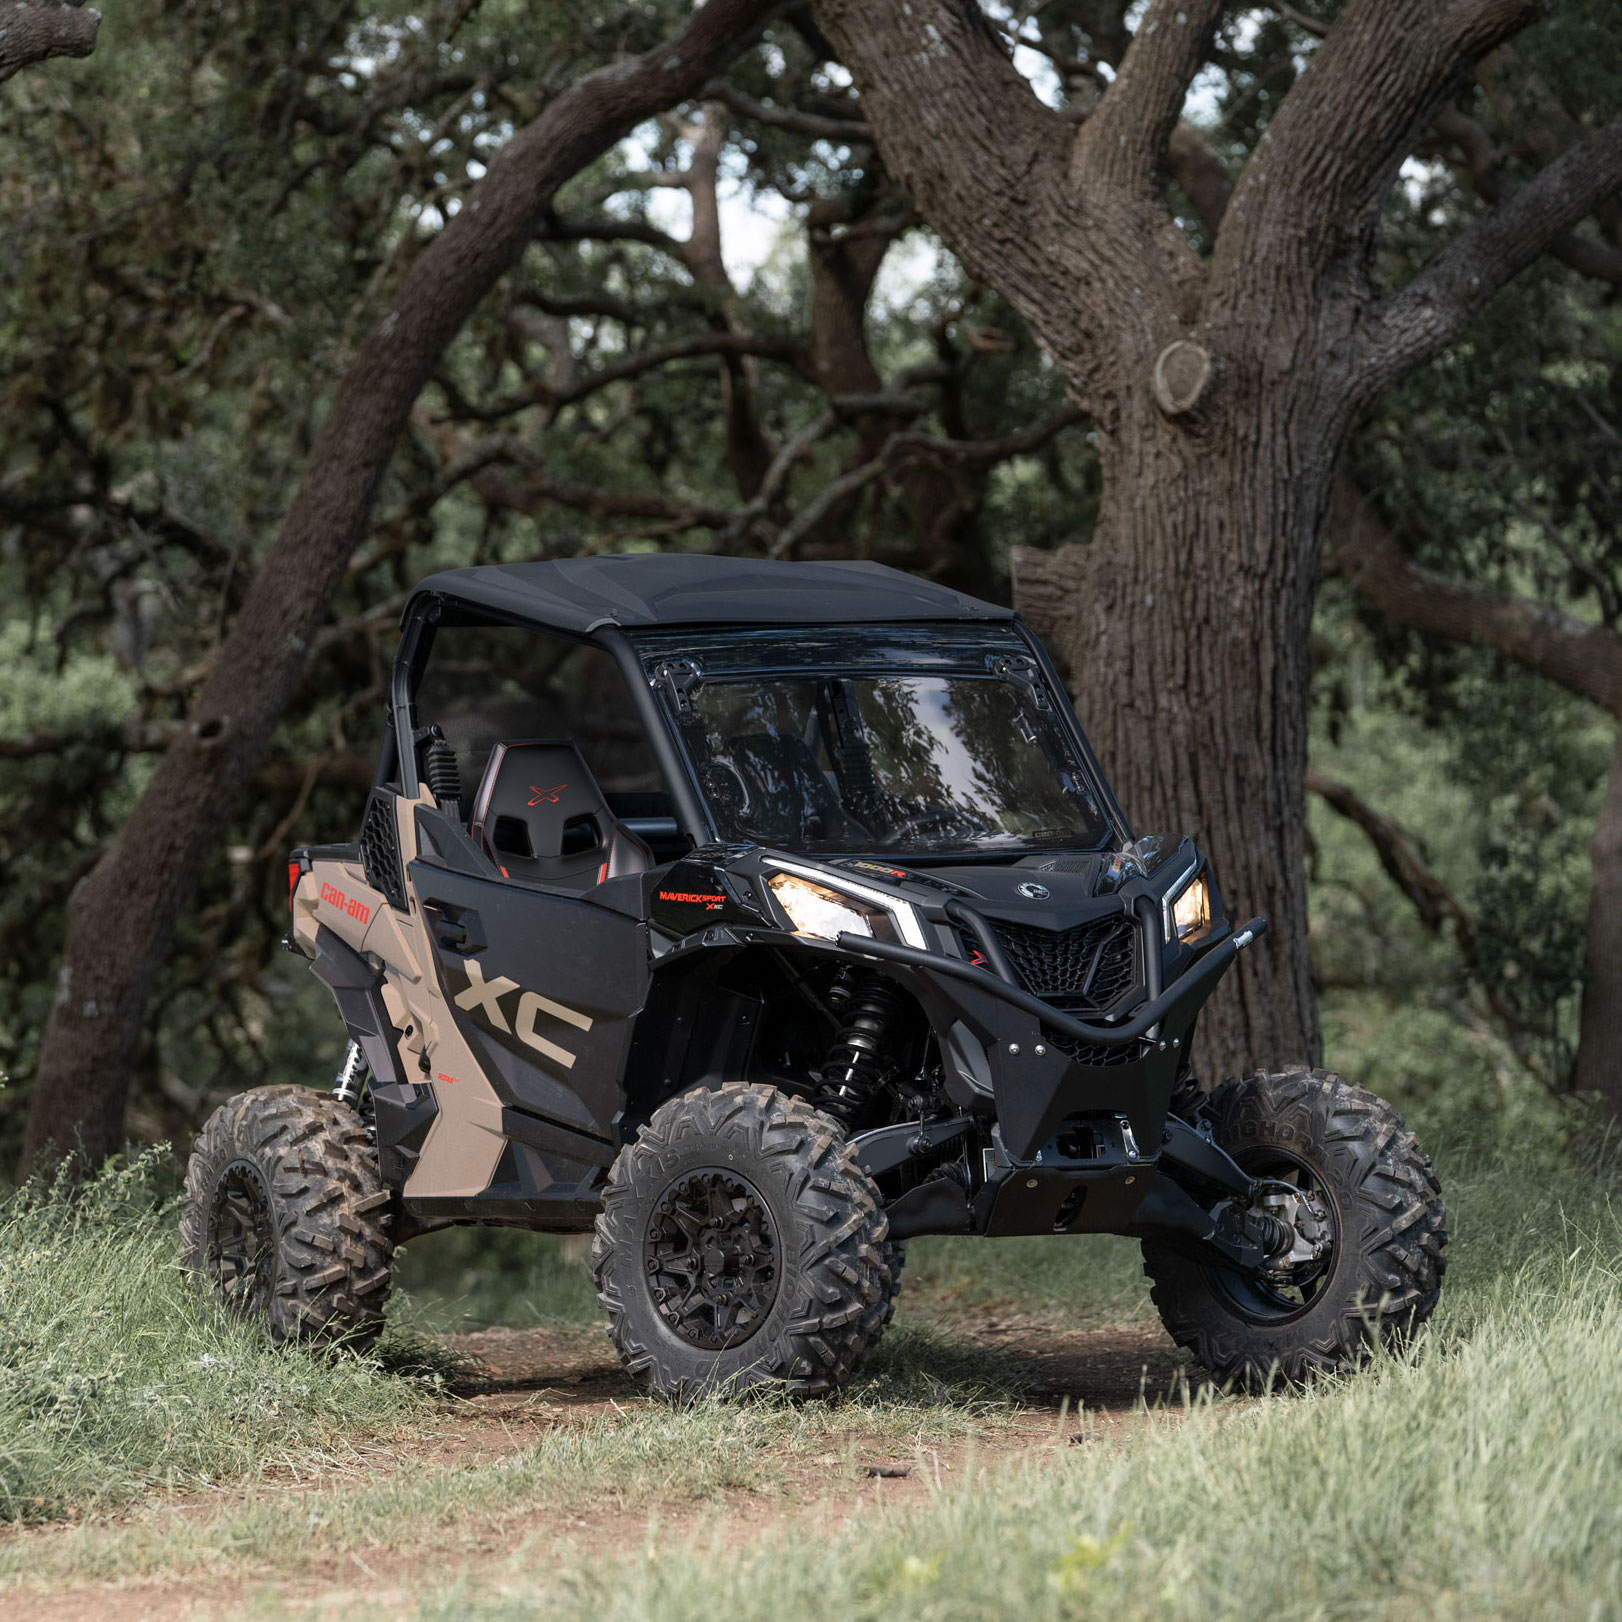 A parked Can-Am Maverick Sport X xc side-by-side next to some trees